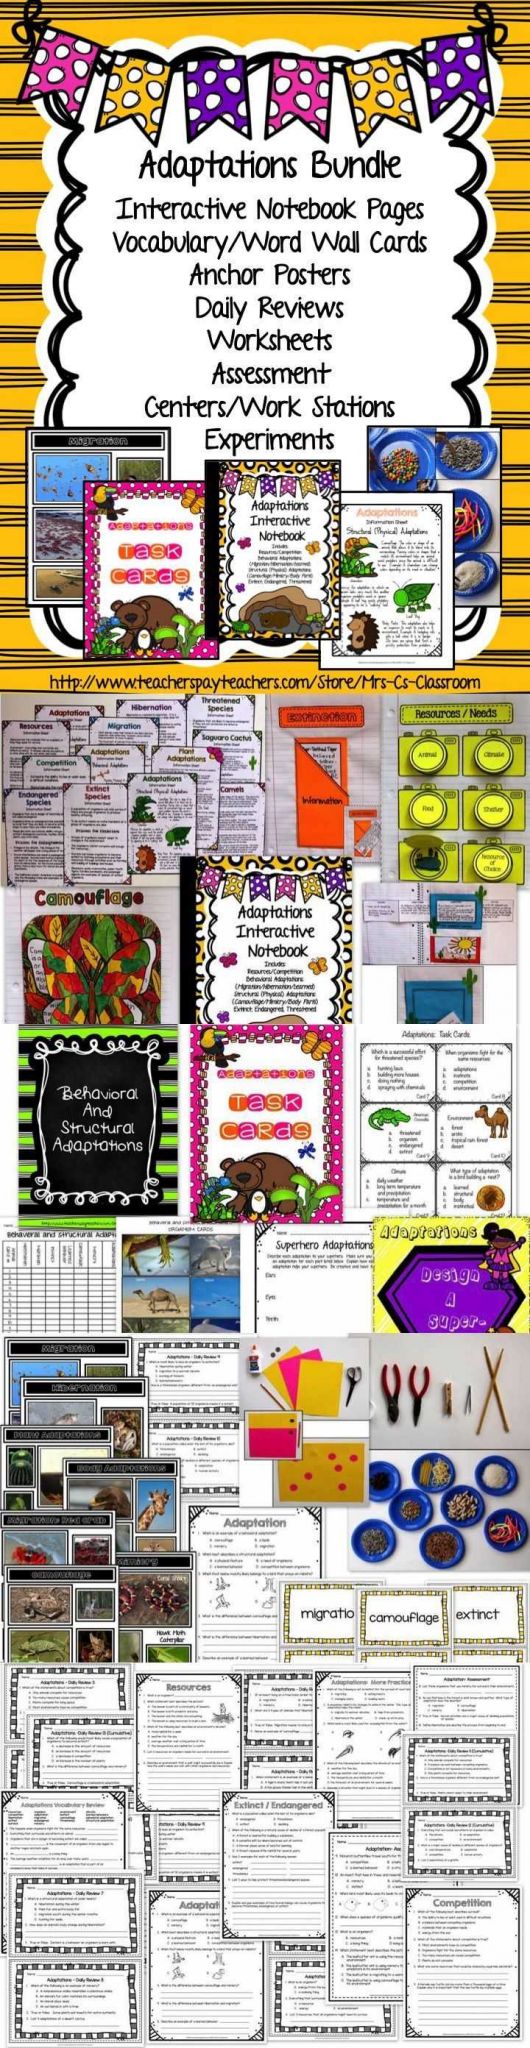 Animal Adaptations Worksheets together with Adaptations Behavioral Structural Physical Bundle Science